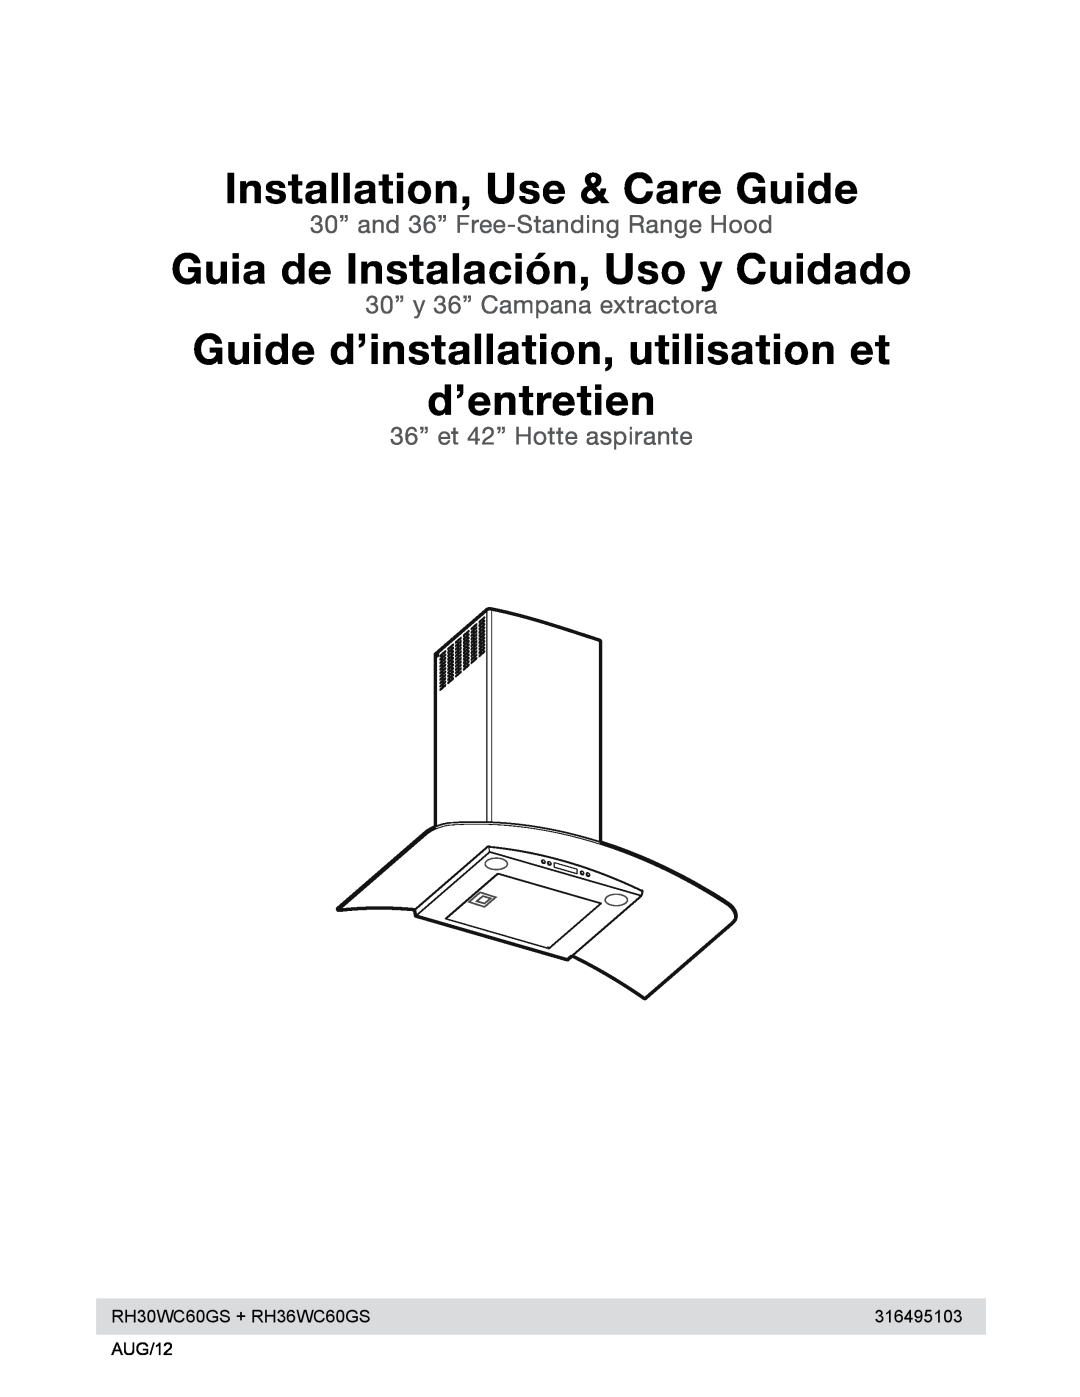 Electrolux manual RH30WC60GS + RH36WC60GS, 316495103, AUG/12, Installation, Use & Care Guide 